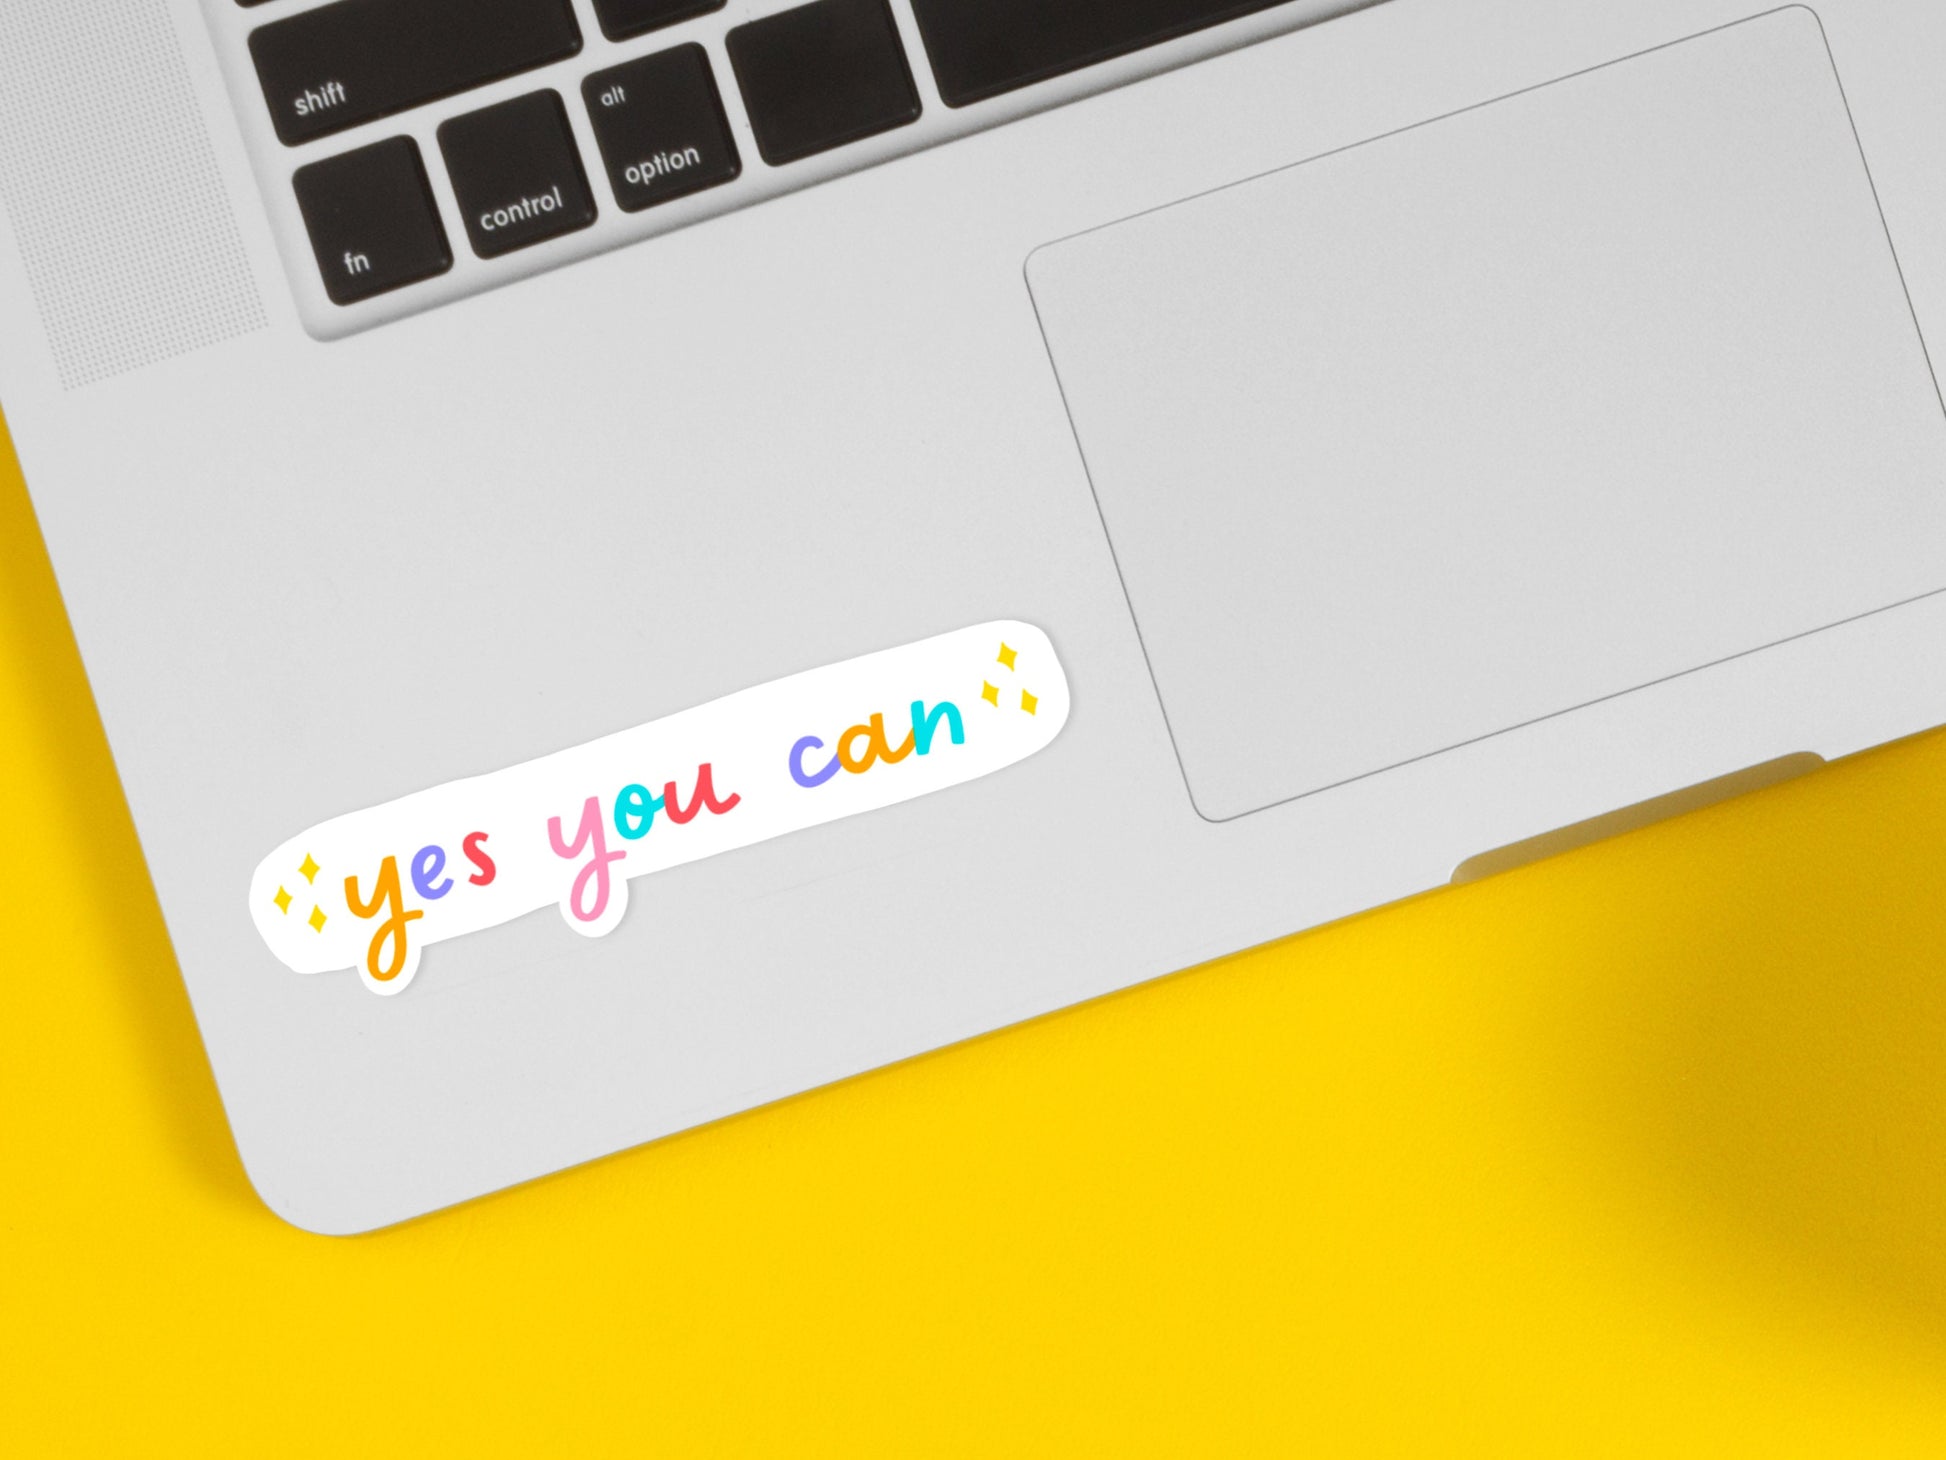 Yes You Can Sticker | Aesthetic Sticker | Rainbow Sticker | Transparent Stickers